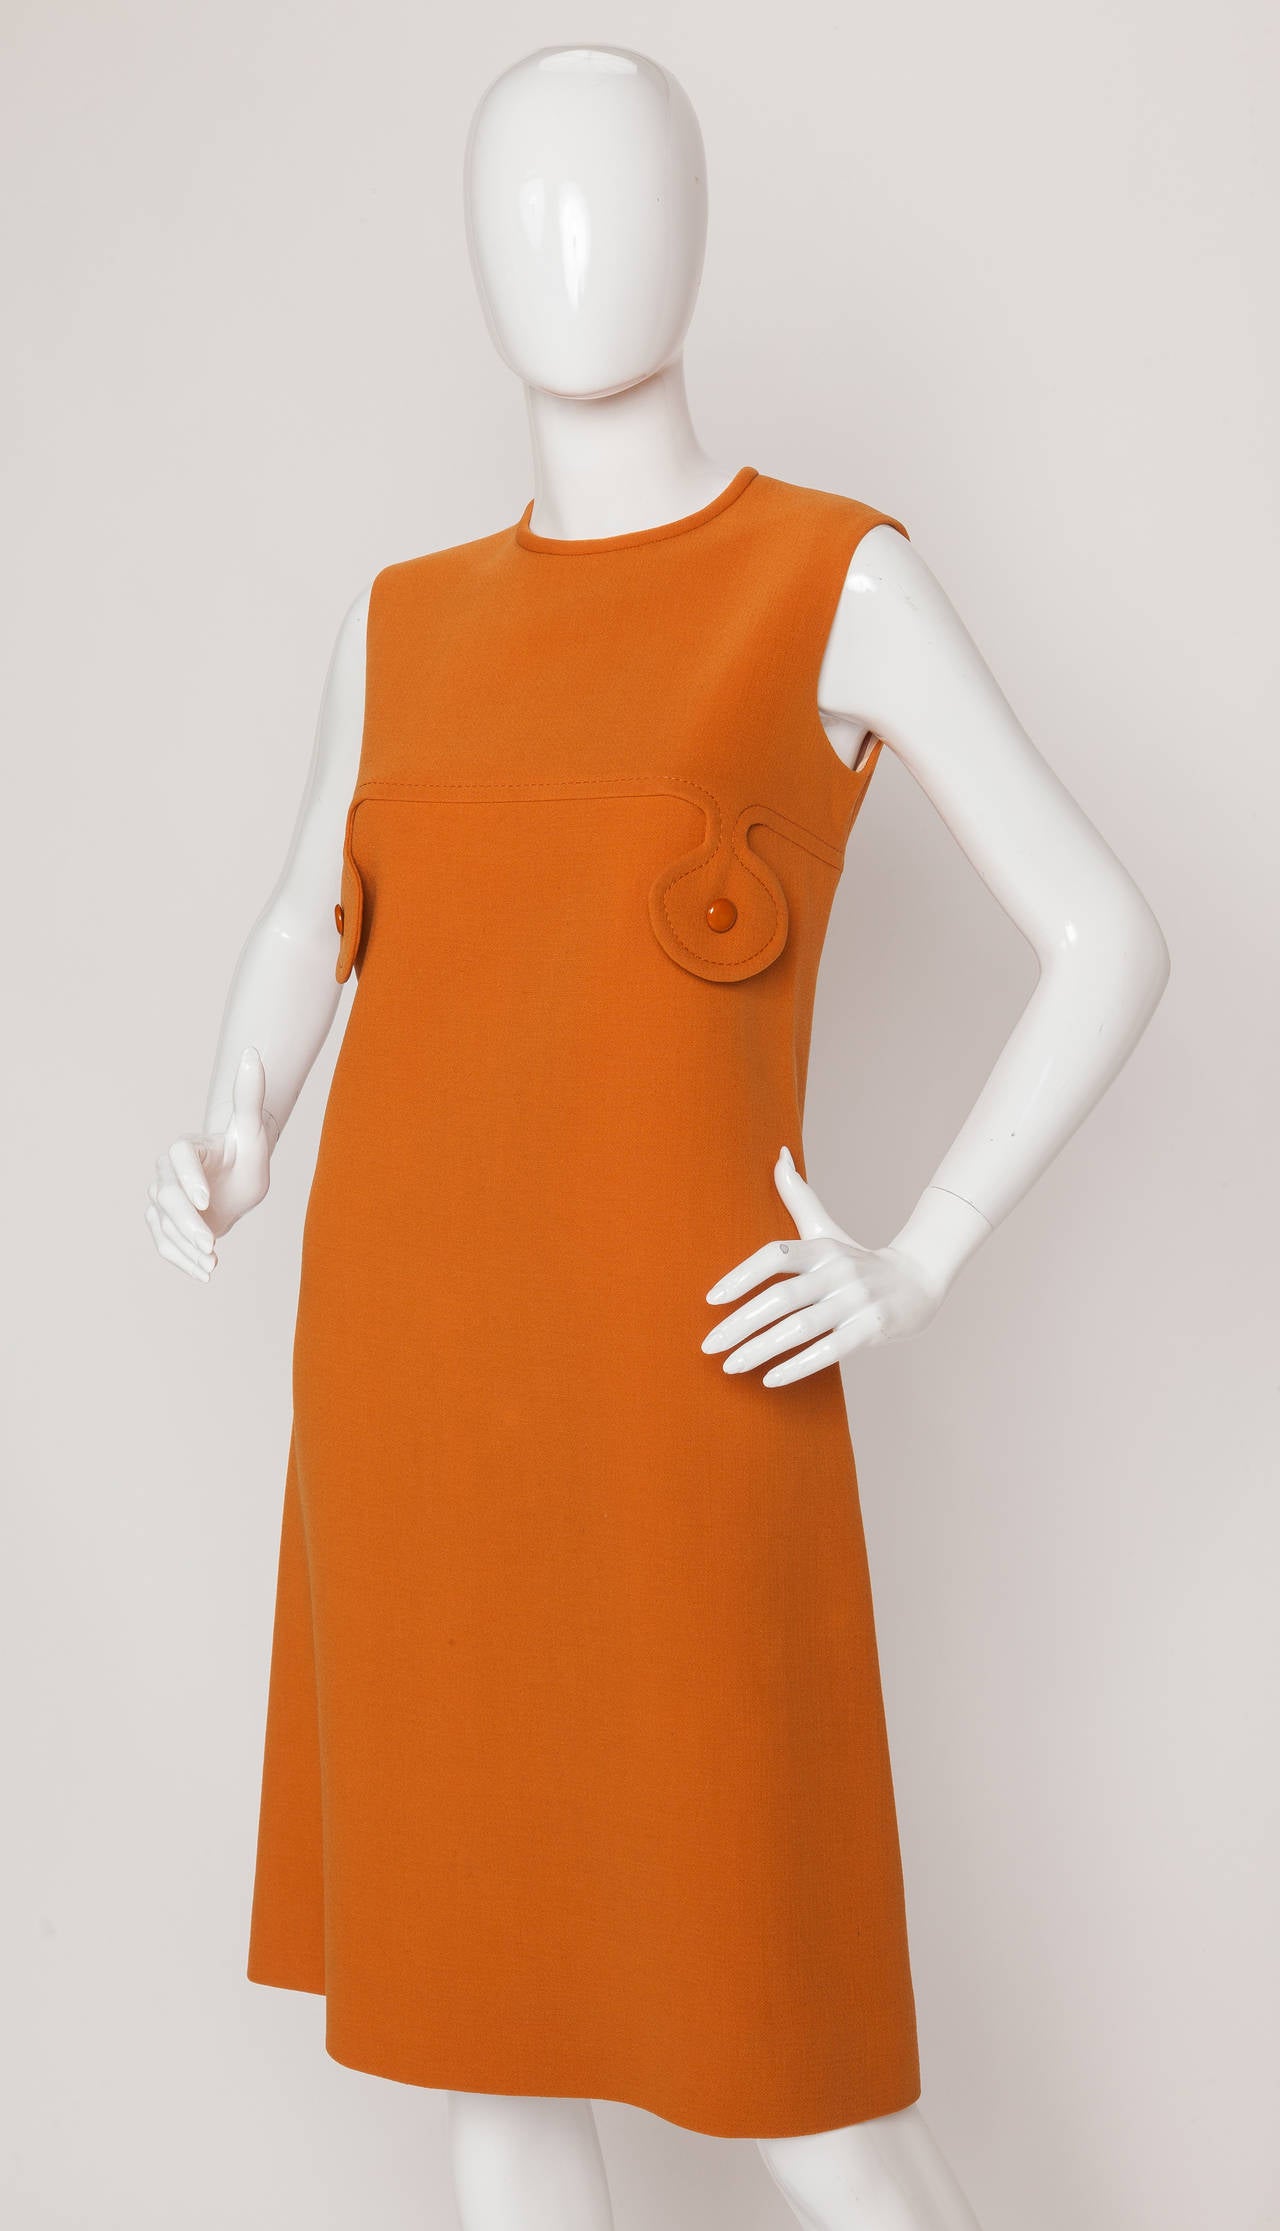 Pierre Cardin Space Age Mod Wool Crepe Jacket and Dress Ensemble ca.1971 2